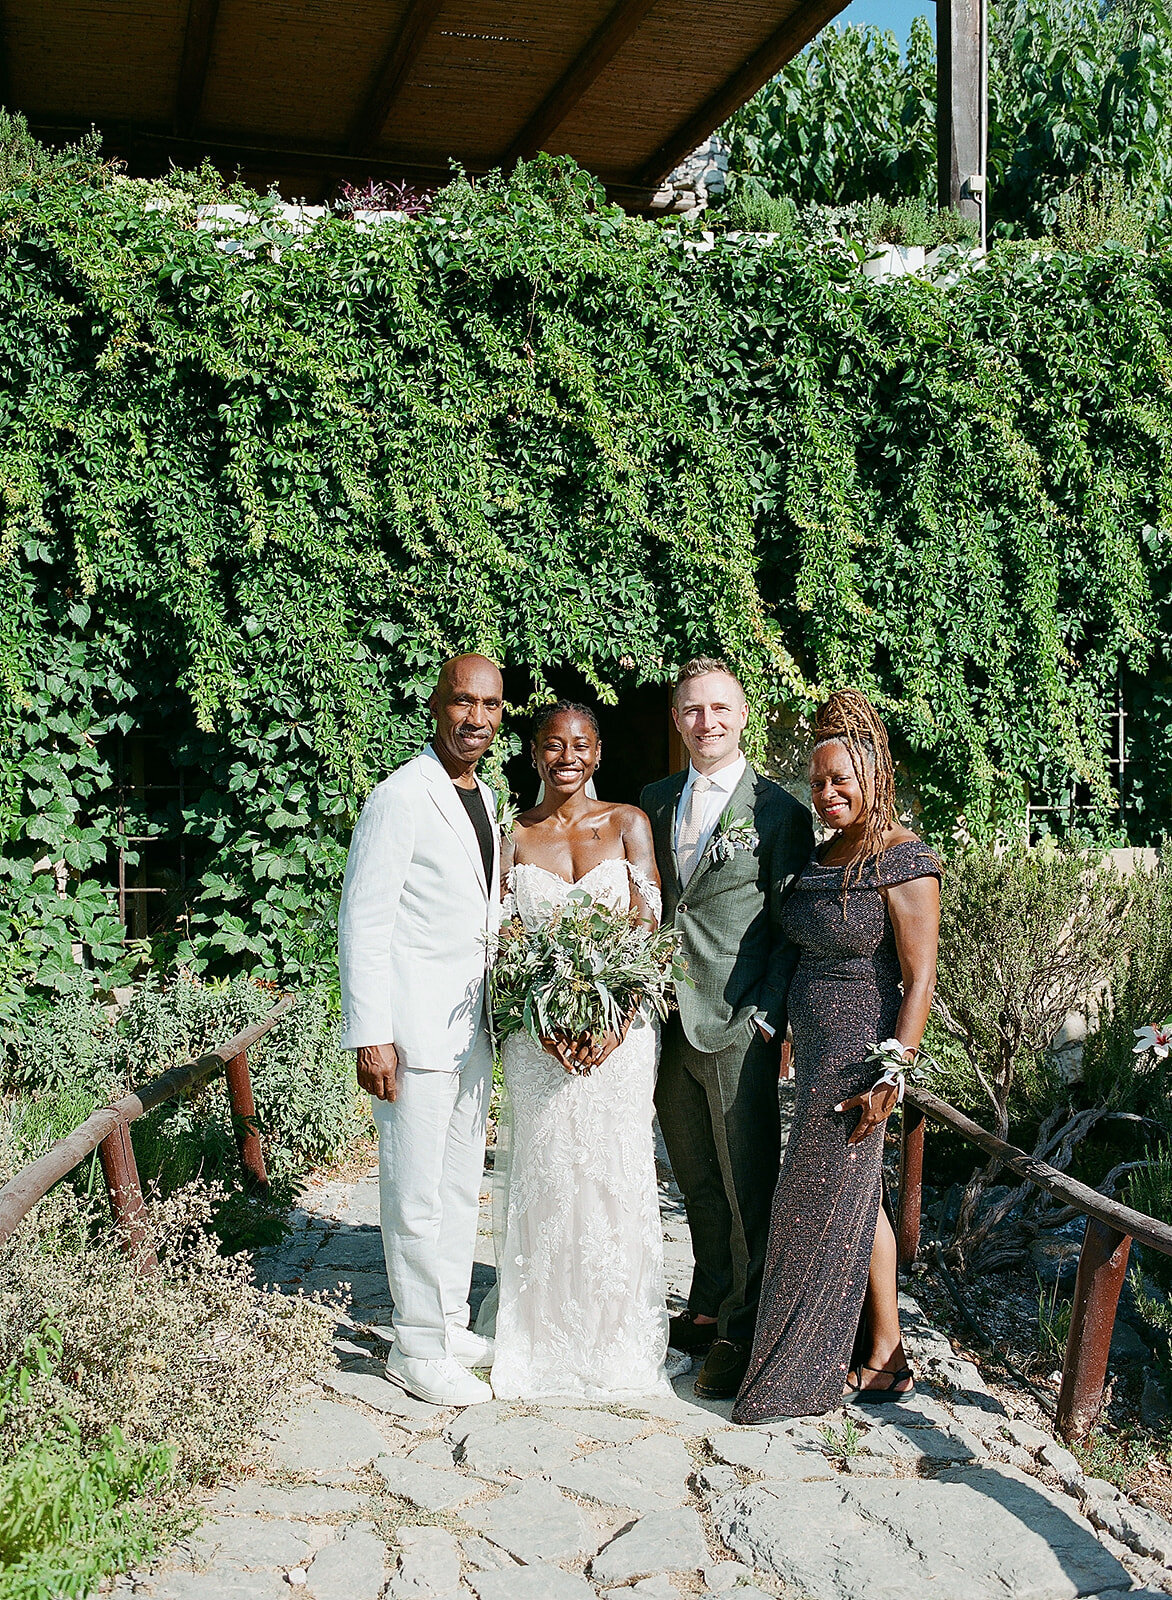 India + Thomas - Wedding Day - Luxury Event Planner - Michelle Norwood Events70